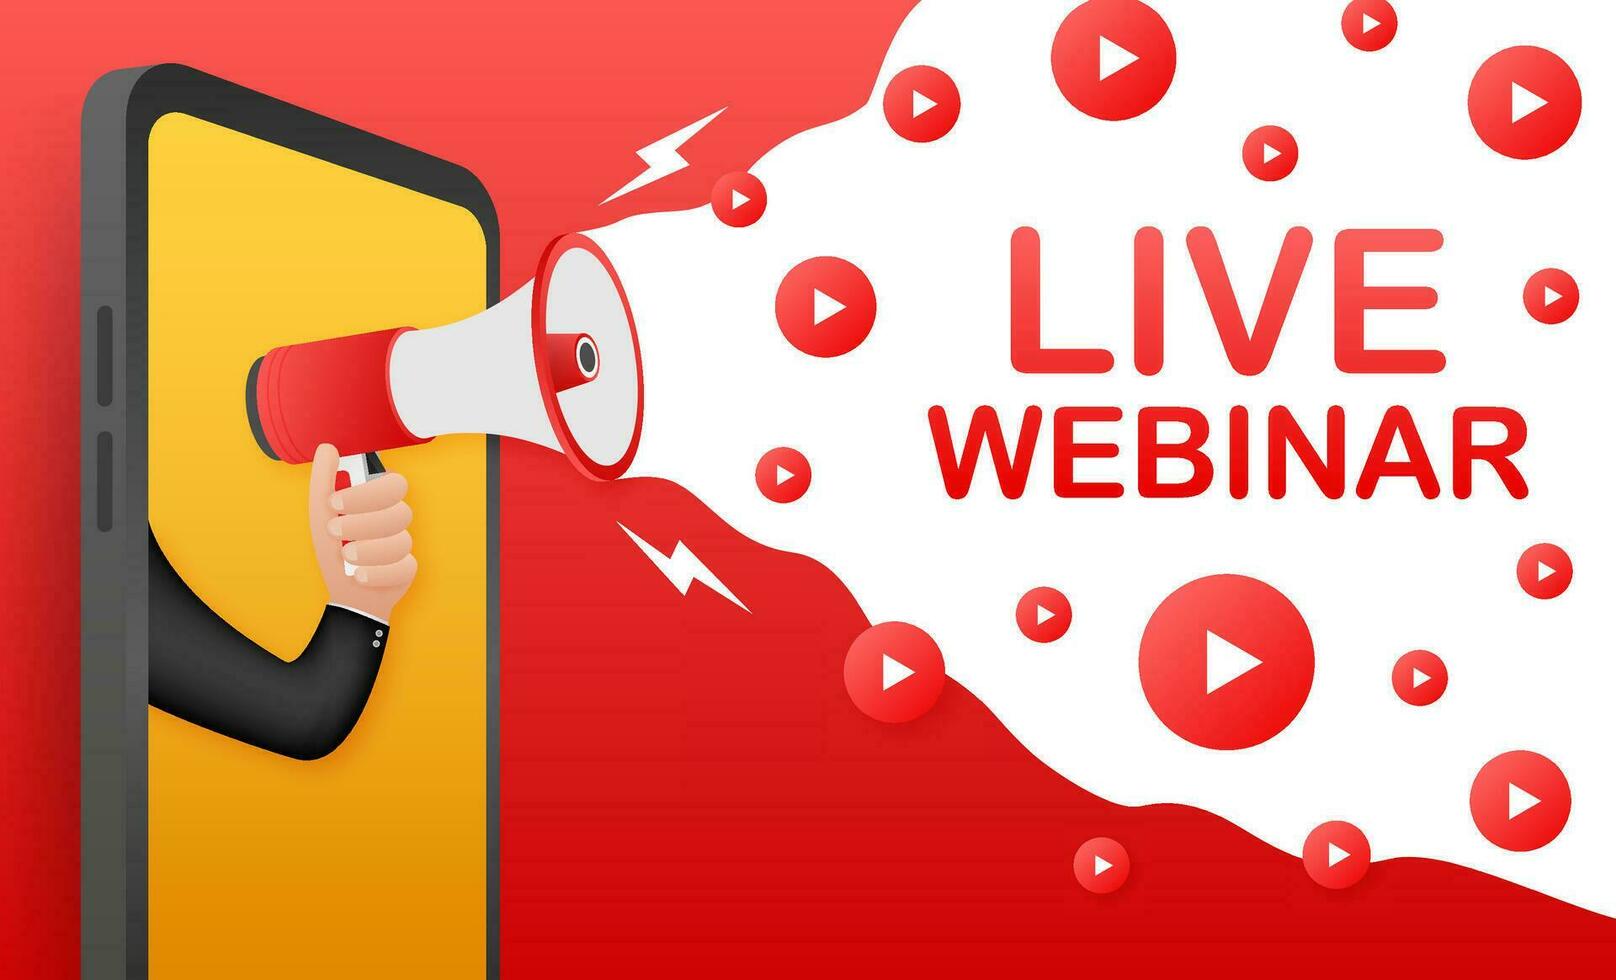 Live webinar, megaphone no smartphone screen. Can be used for business concept. Vector stock illustration